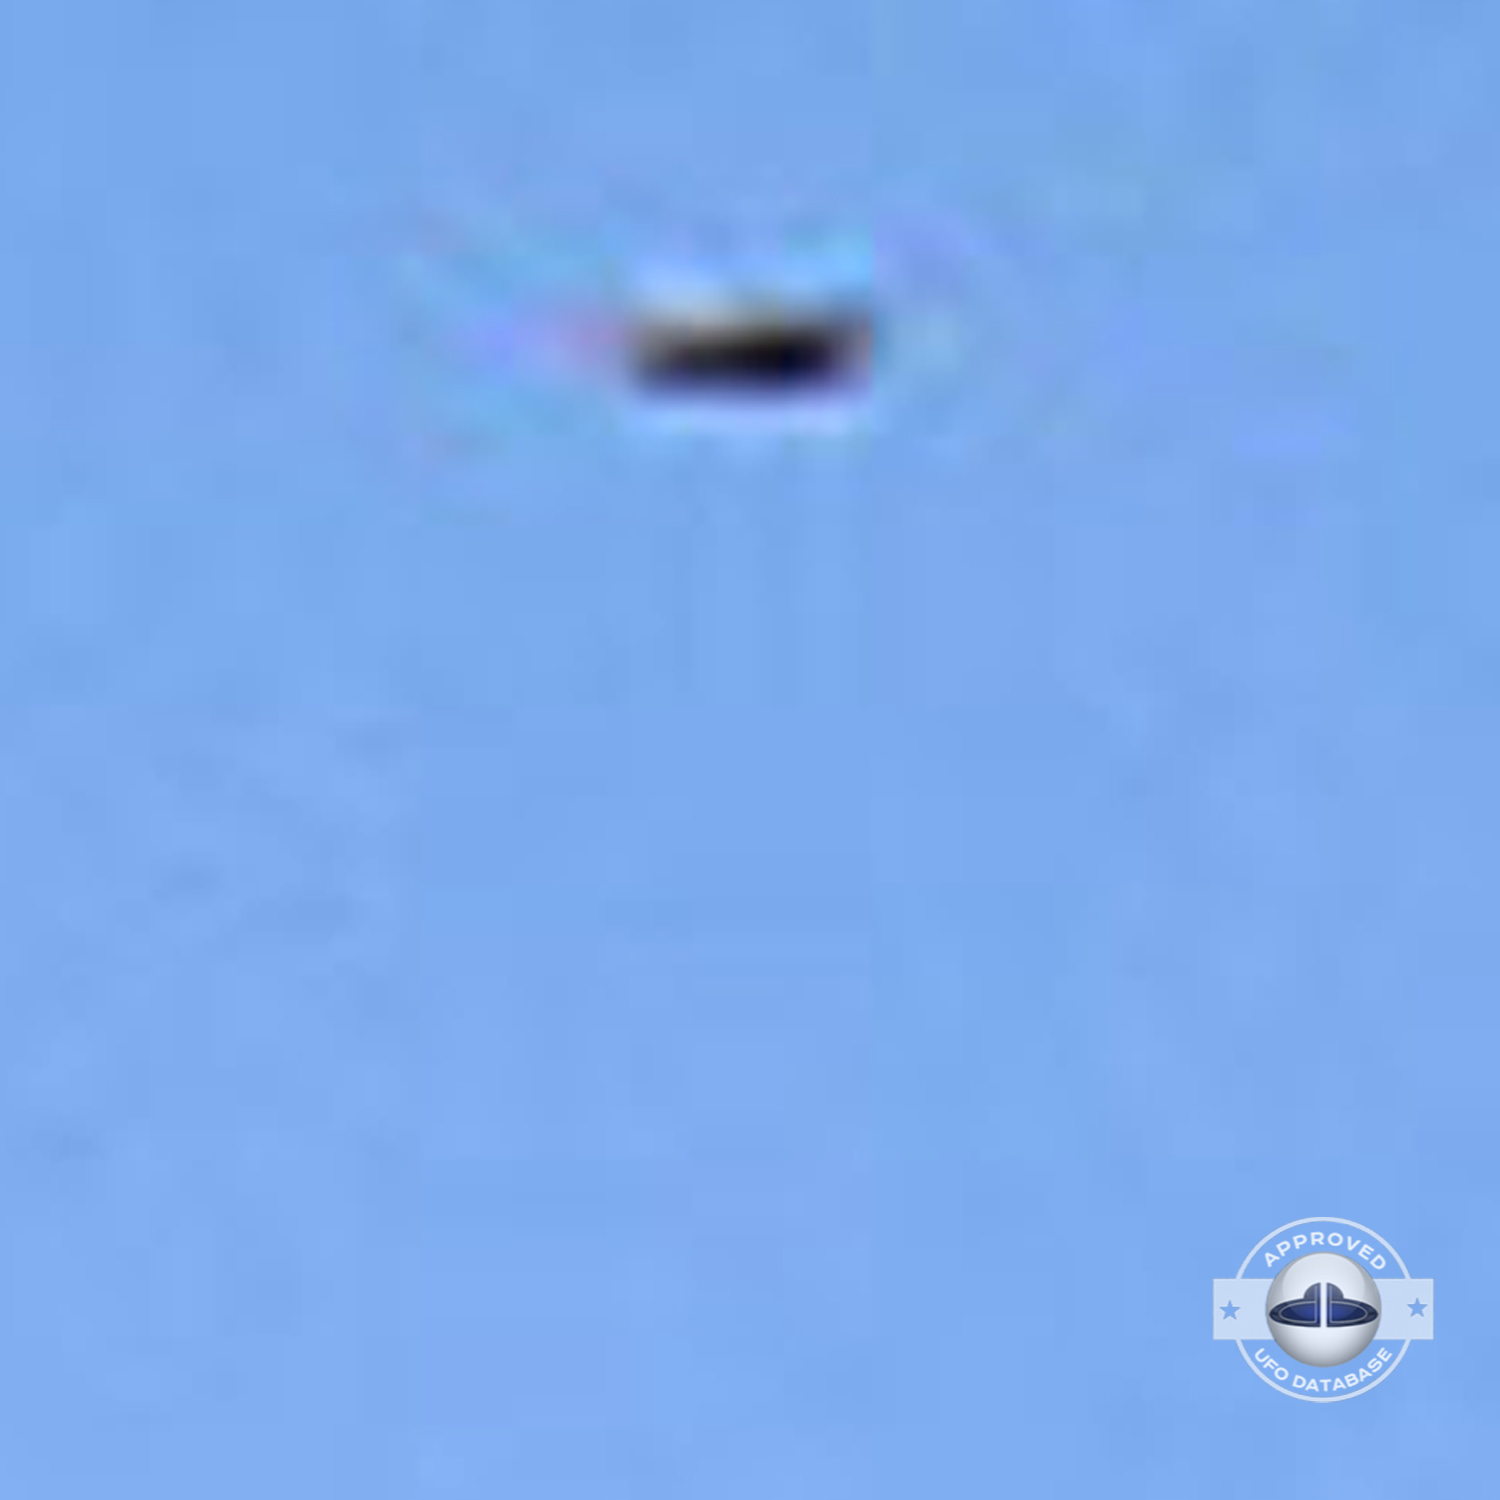 UFO picture taken in Tasmania on A10 highway going from south to north UFO Picture #80-5